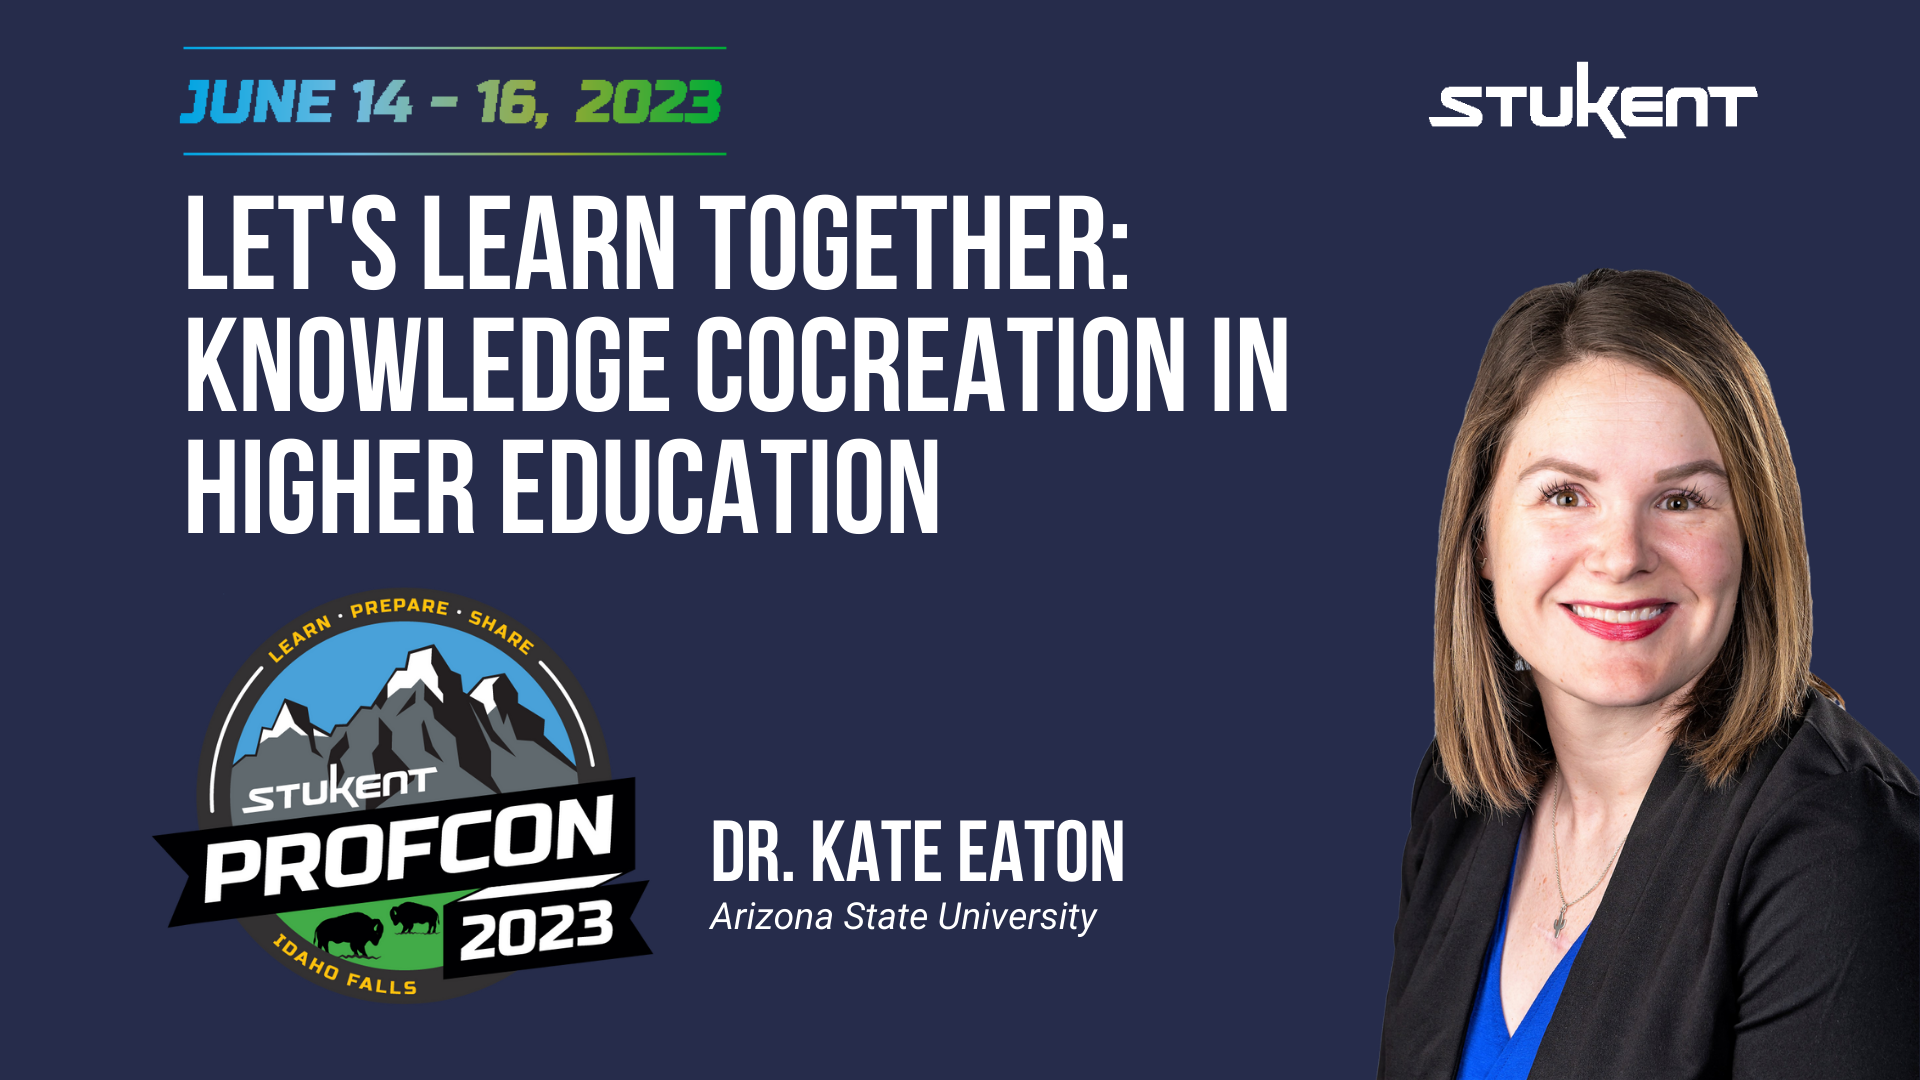 Let’s Learn Together: Knowledge Cocreation in Higher Education